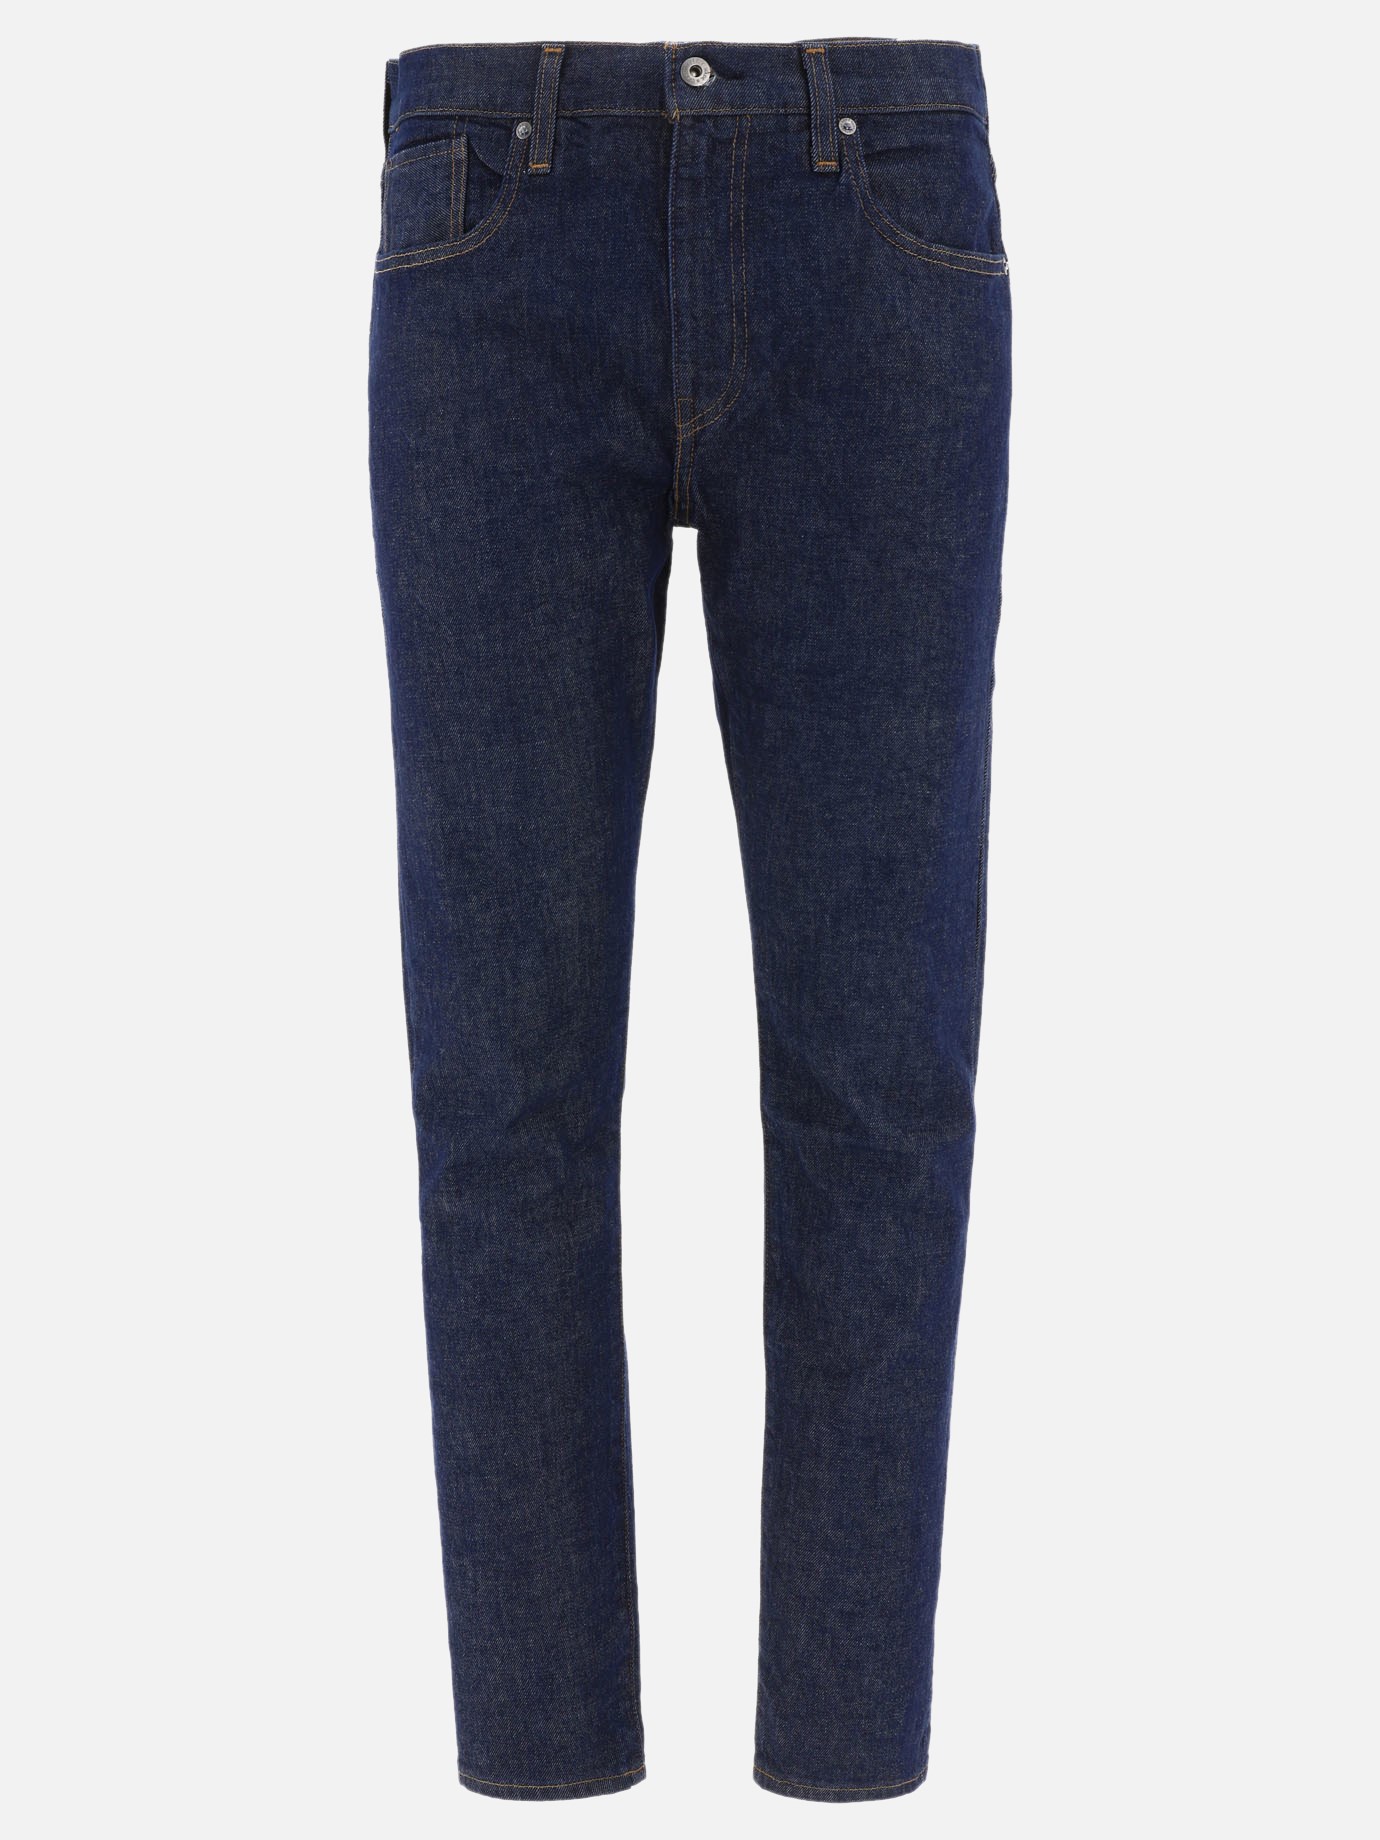 Jeans  512 Slim Taper  by Levi's Made & Crafted